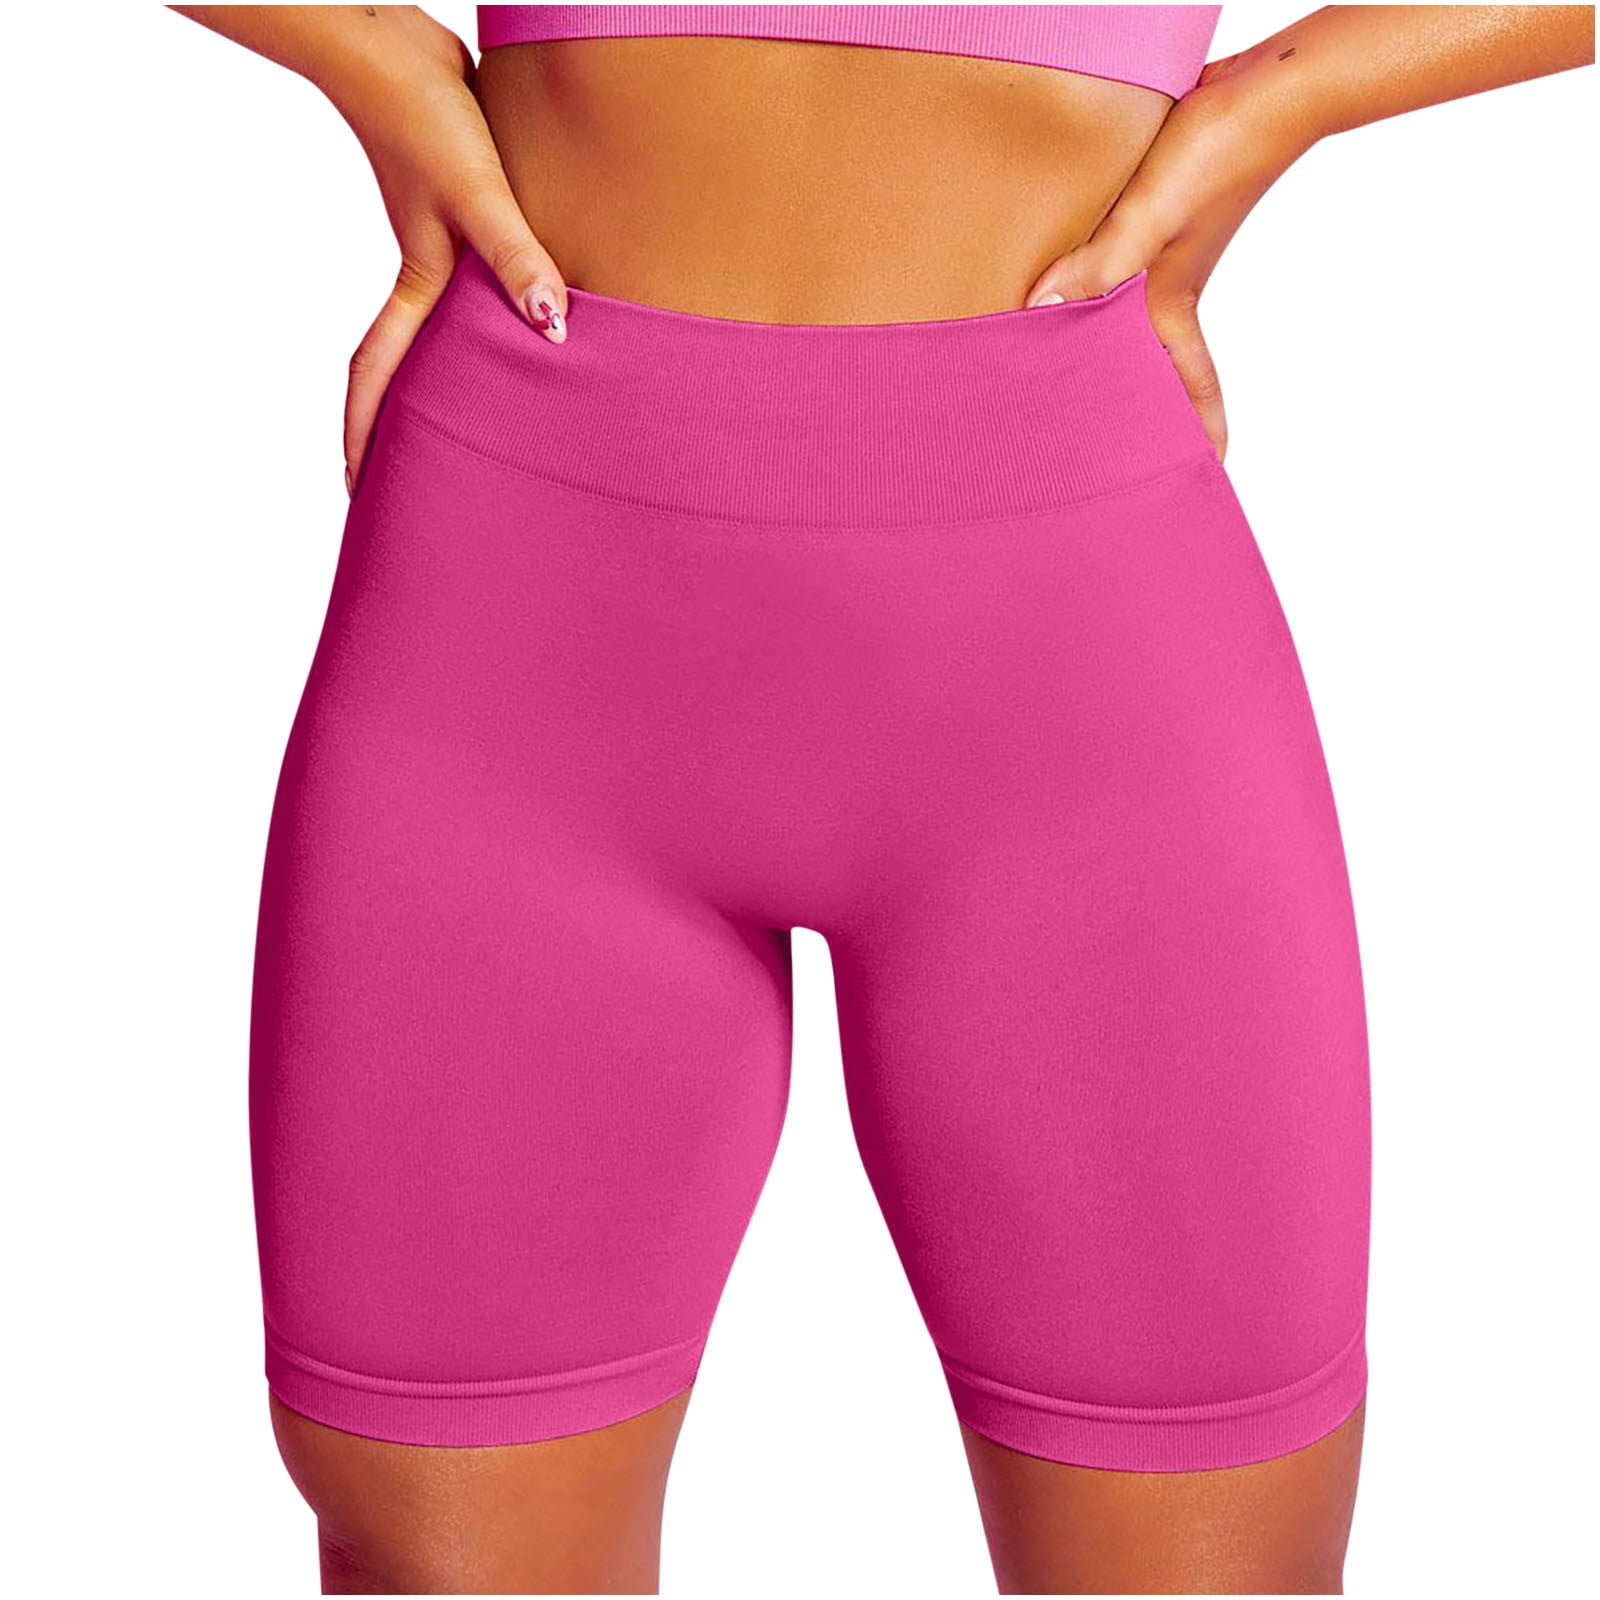 Breathable Candy Colored Shark Sports Direct Leggings For Girls